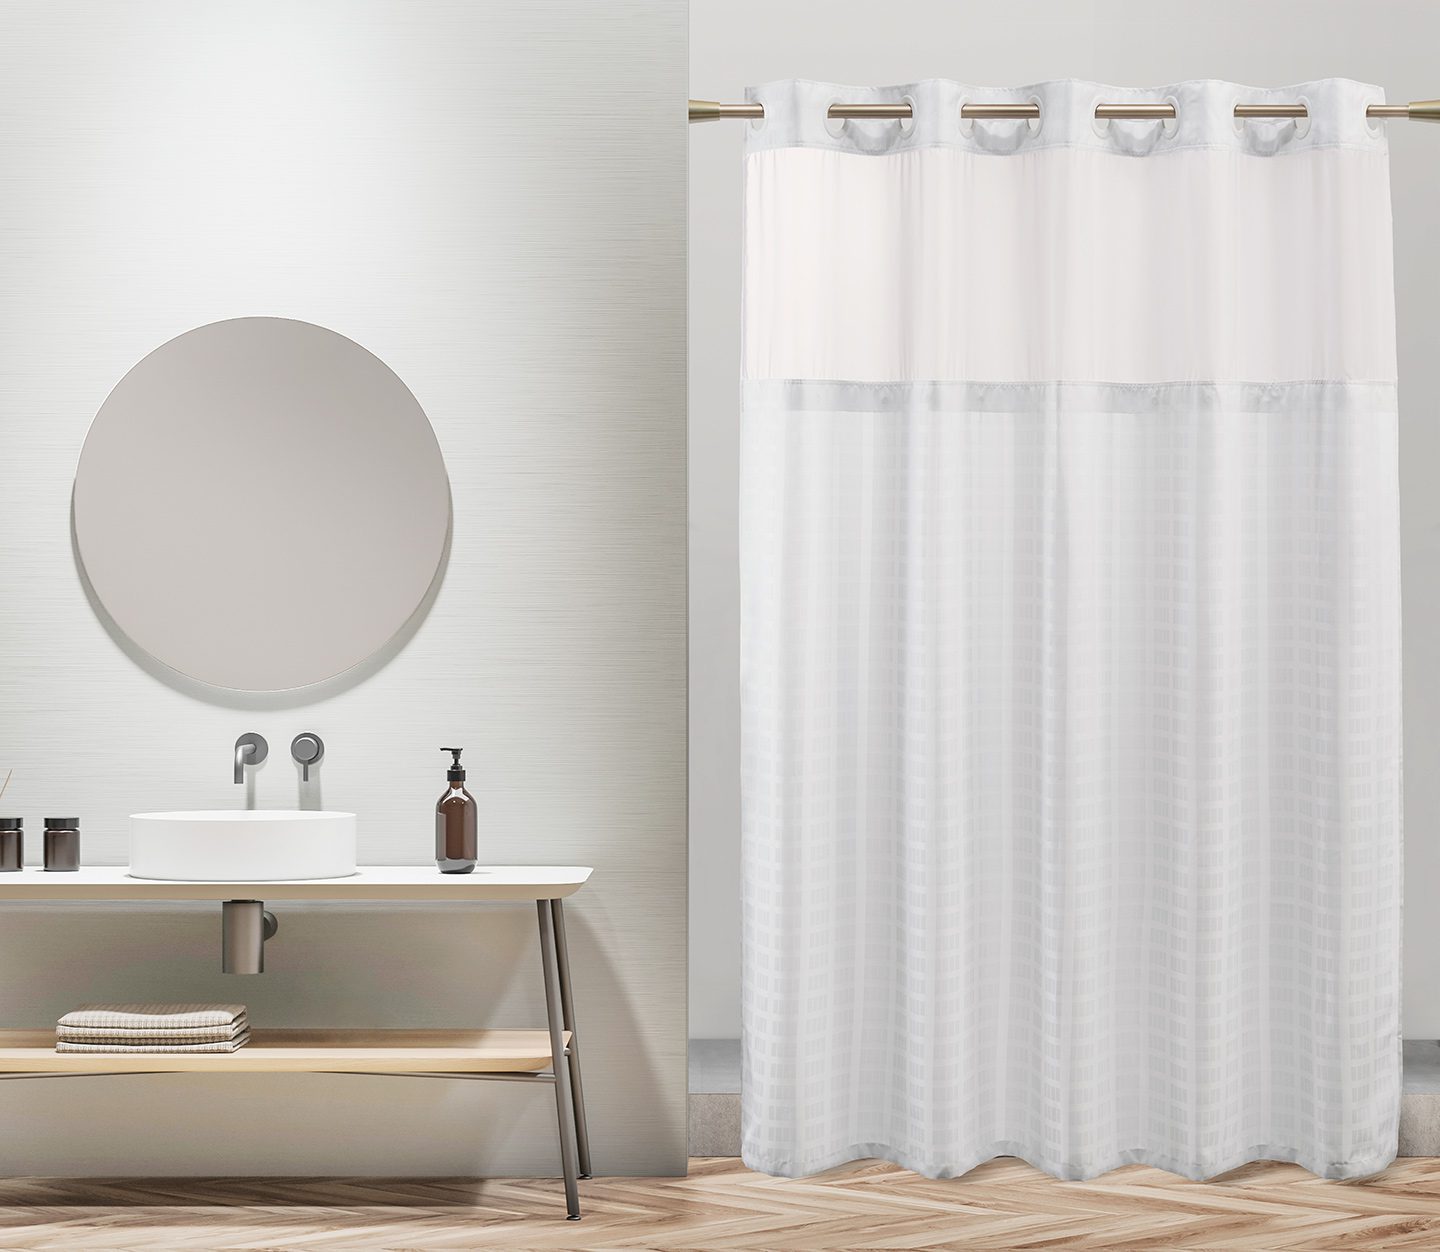 Hookless Shower Curtains  Hookless Shower Curtain Liners